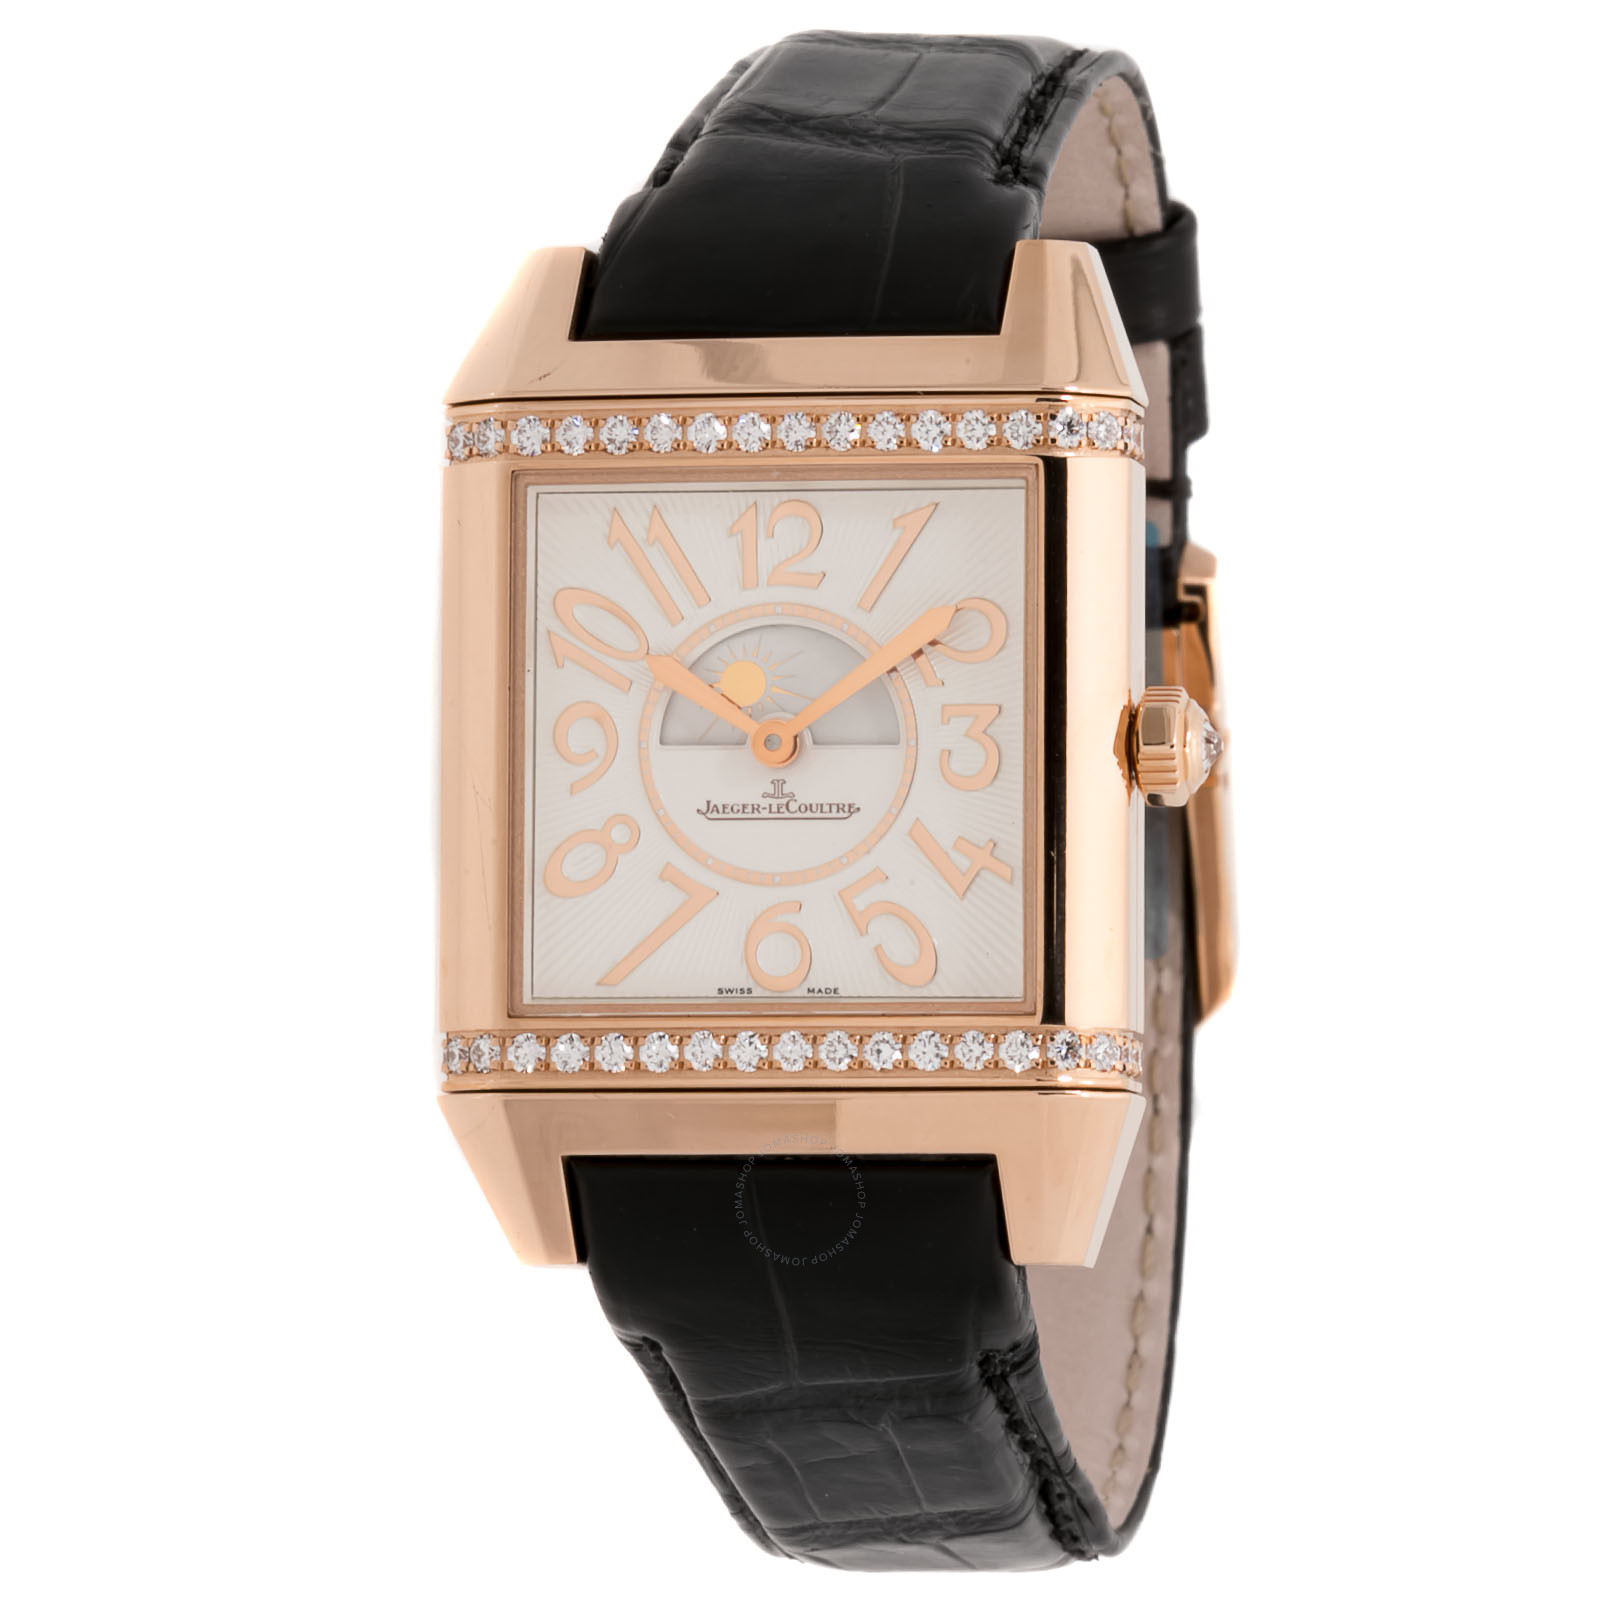 Jaeger LeCoultre Reverso Squadra Lady Duetto Silvered guilloche/ Black Dial Ladies Watch Q7052421